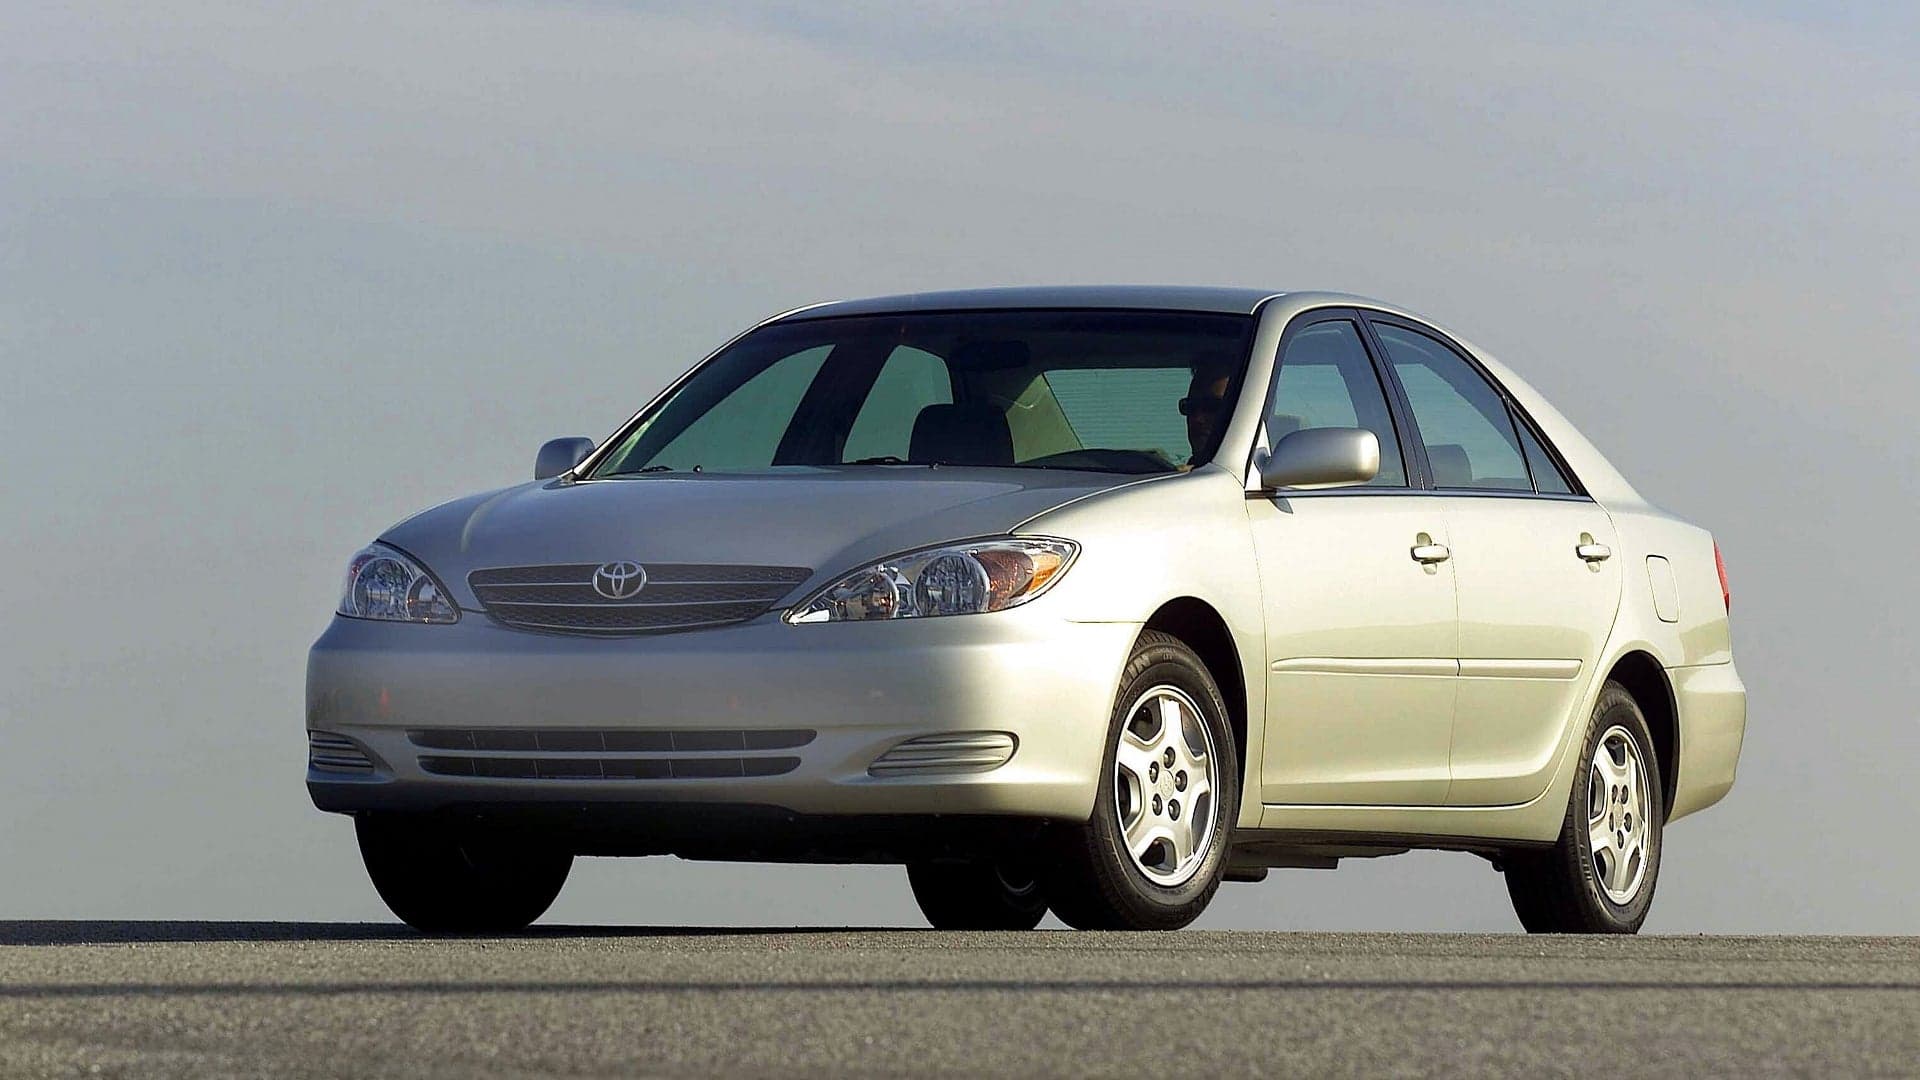 Here Are the Top 15 Cars People Keep For 15 Years or More